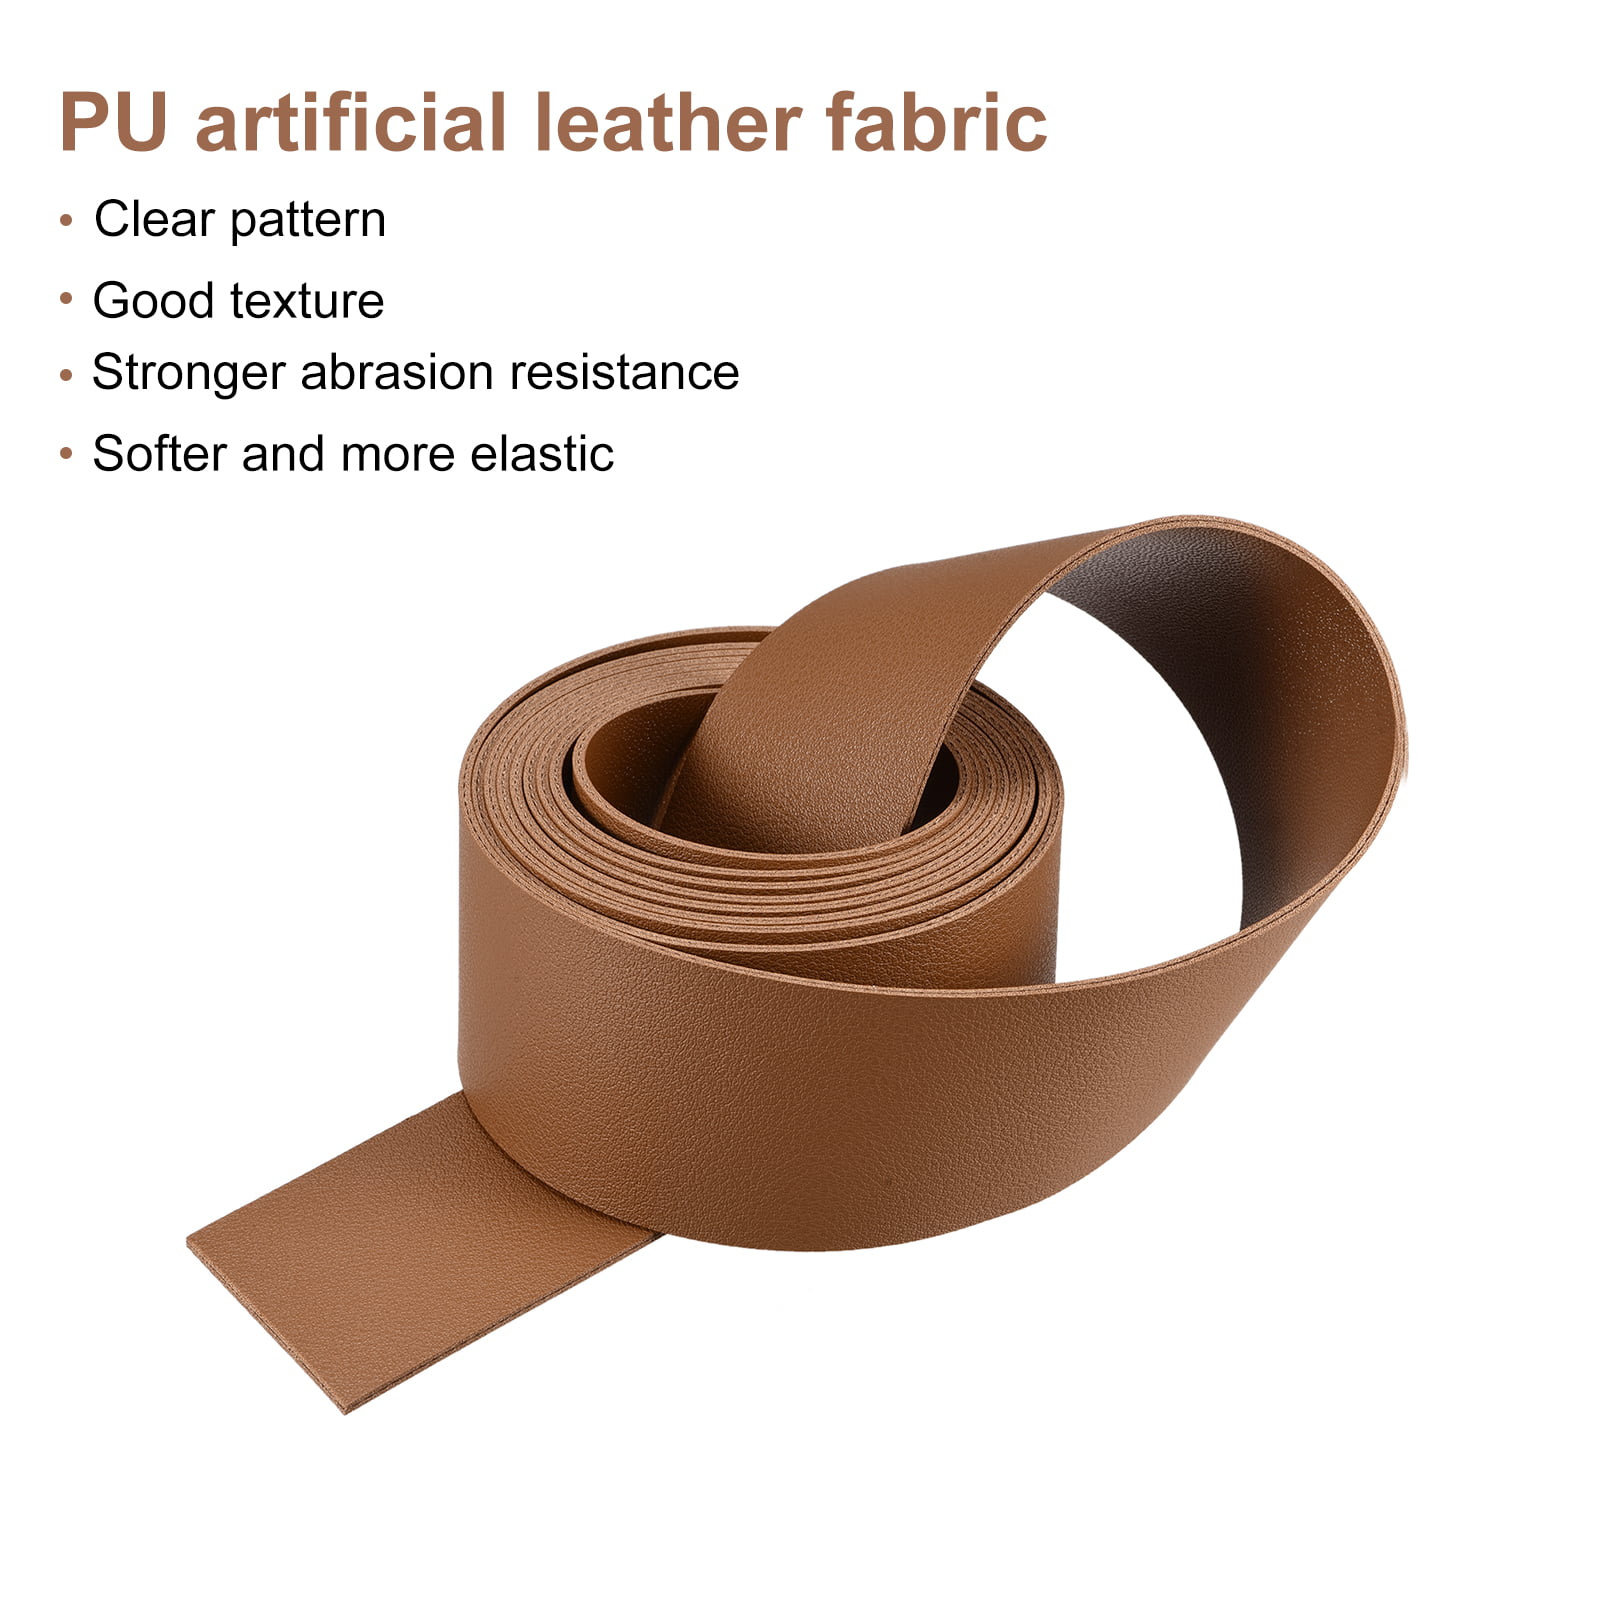 1 x 60 Leather Strip for Crafting or DIY Projects – RAWHYD Leather Co.